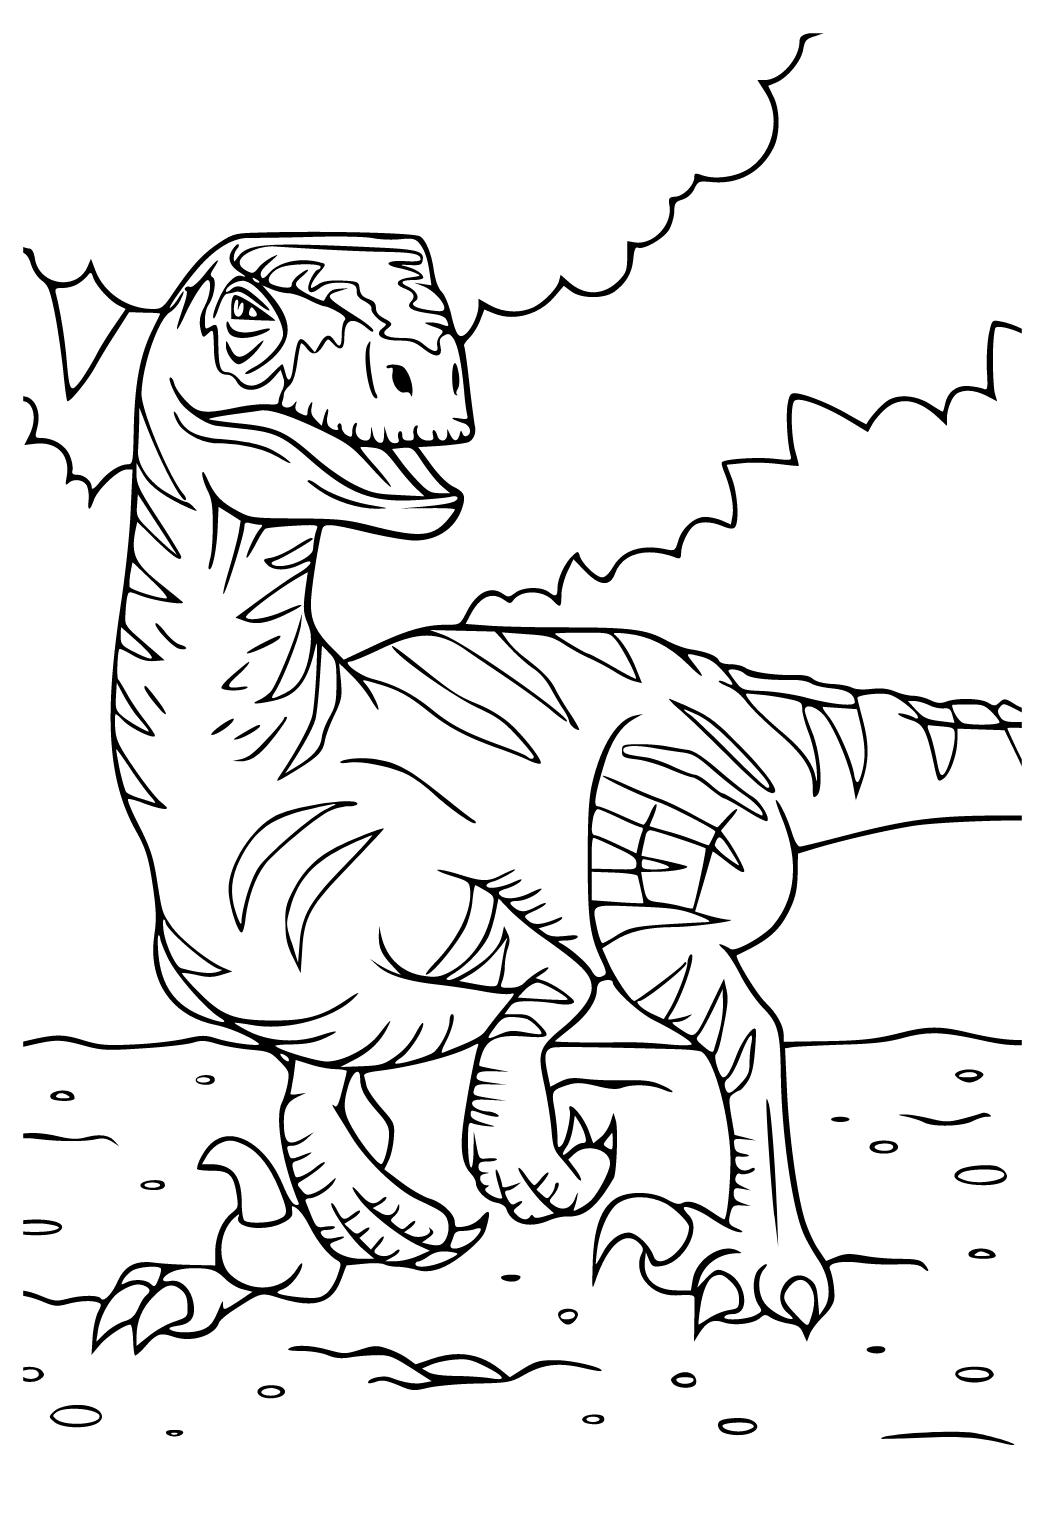 Free printable jurassic park dinosaur coloring page for adults and kids